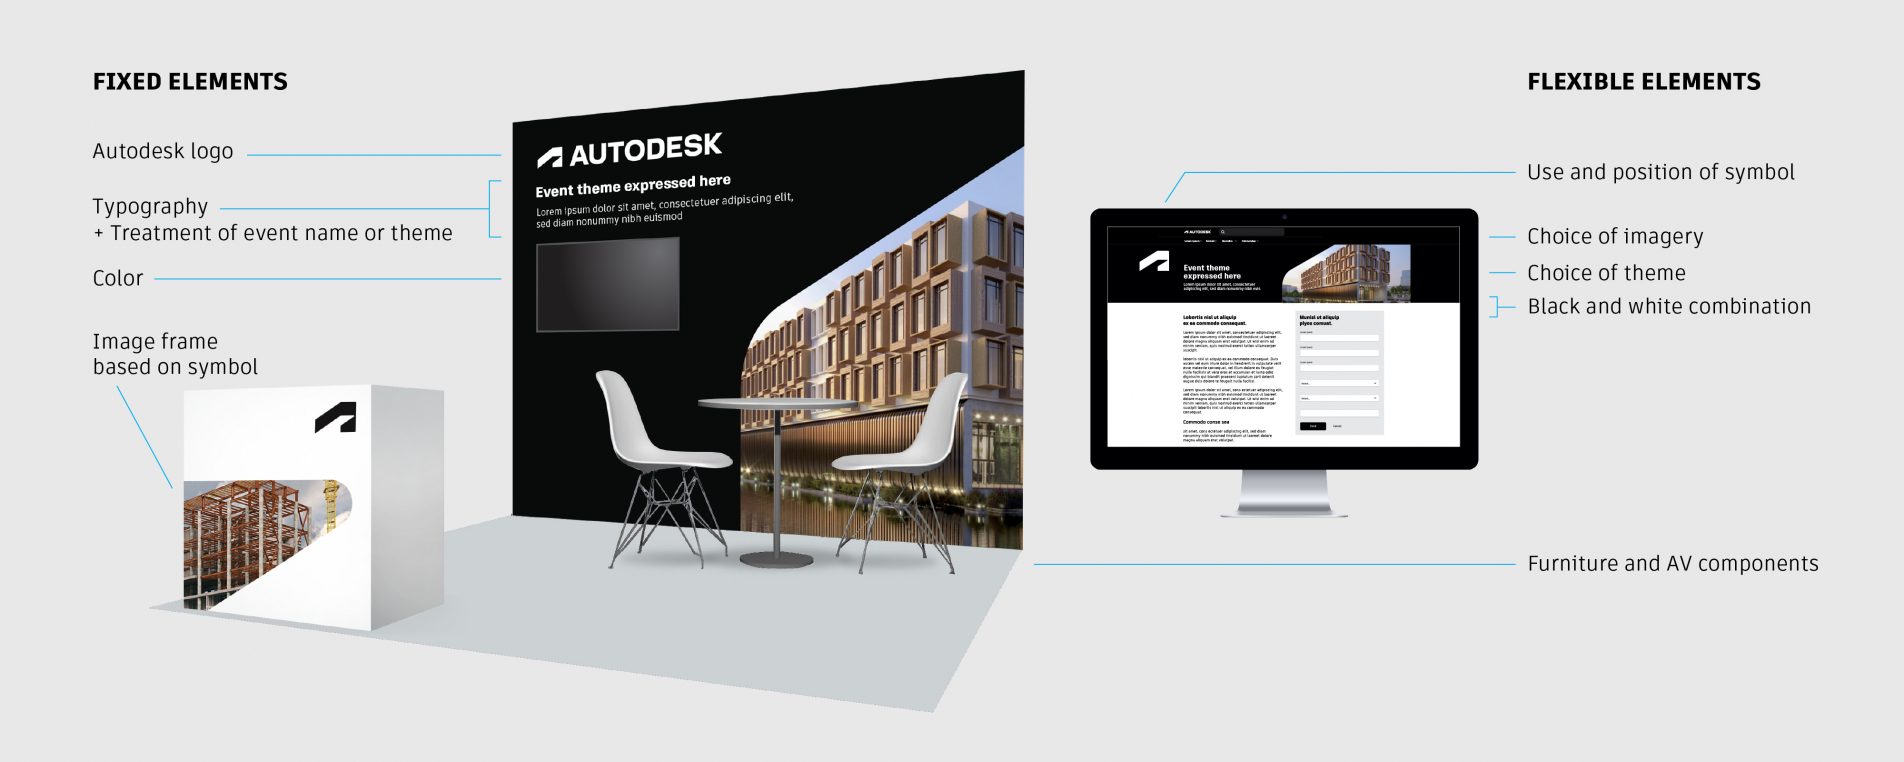 Example of how to present the Autodesk logo and brand at events and on digital devices